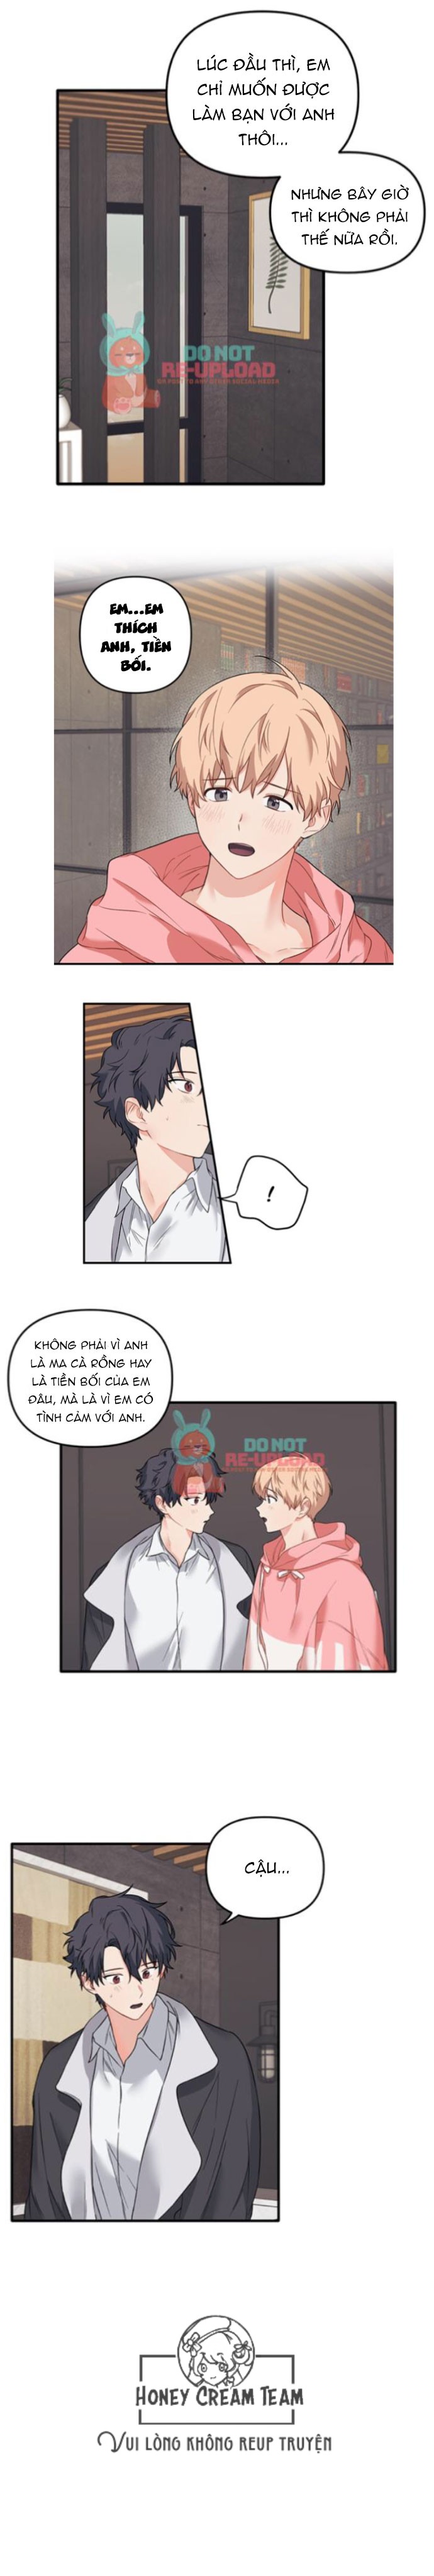 blood-and-love-chap-23-10